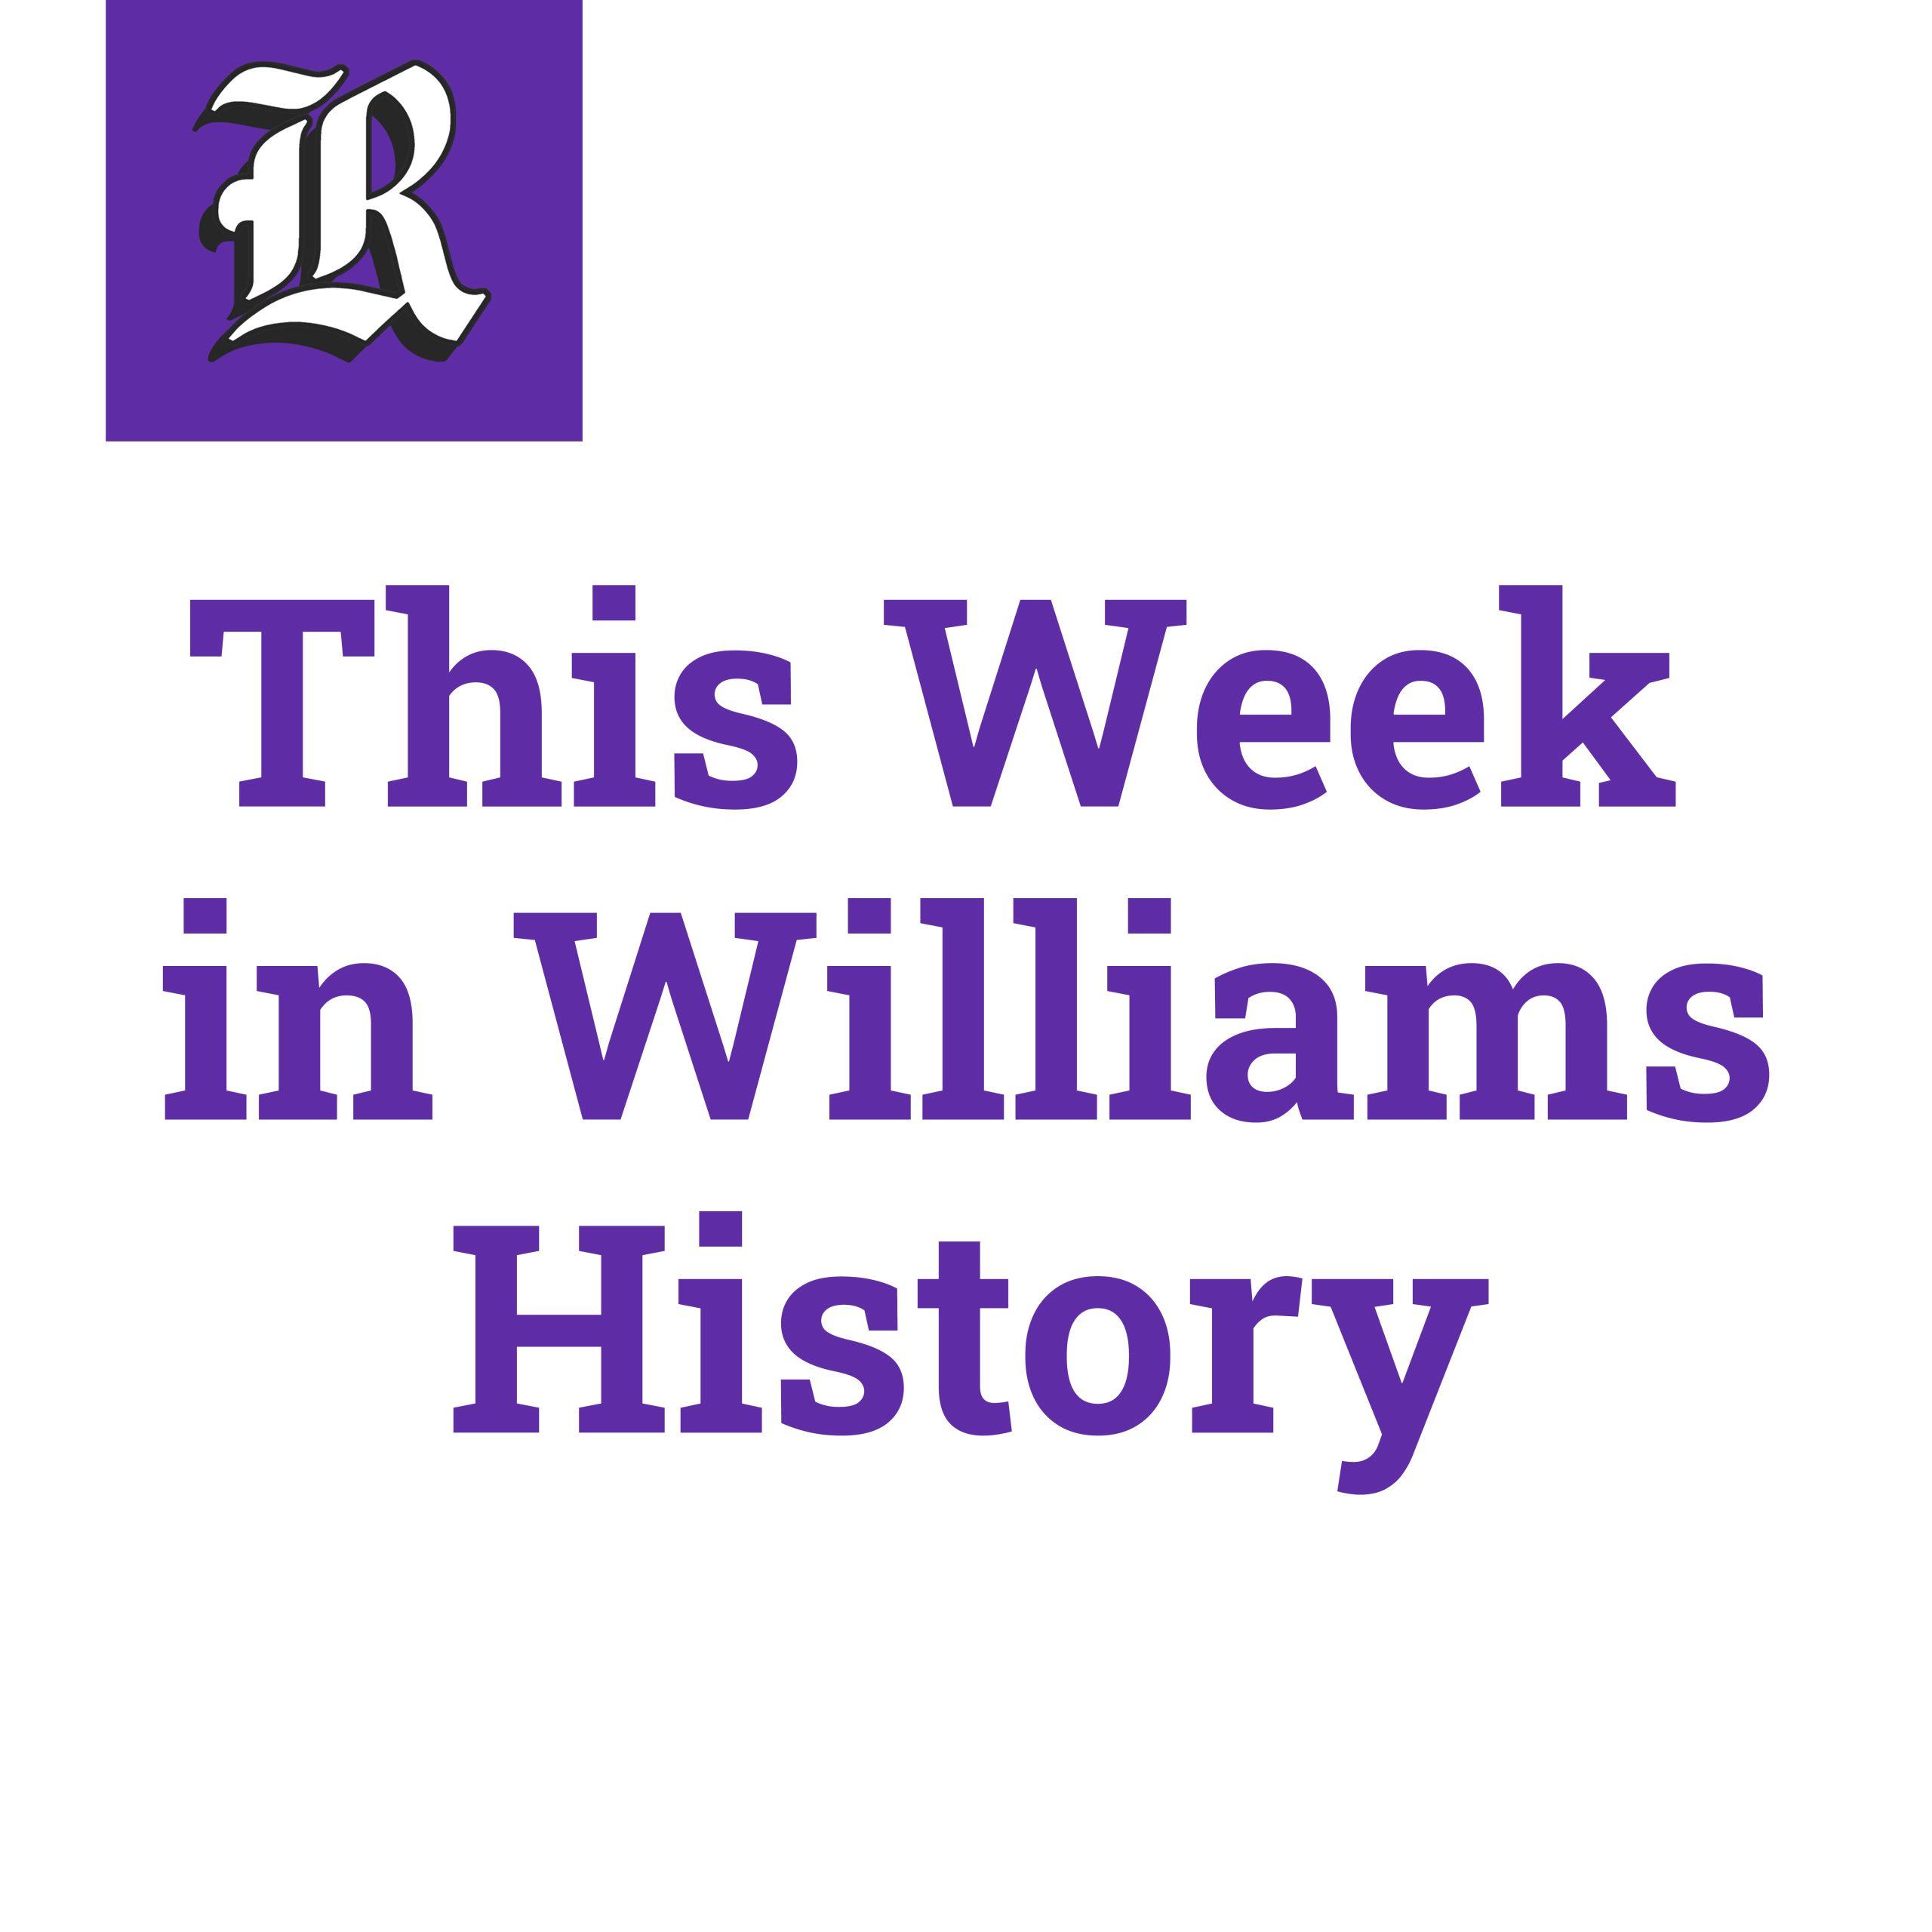 This week in Williams history: An end to compulsory chapel service, College welcomes women, students embark on first WOOLF trips